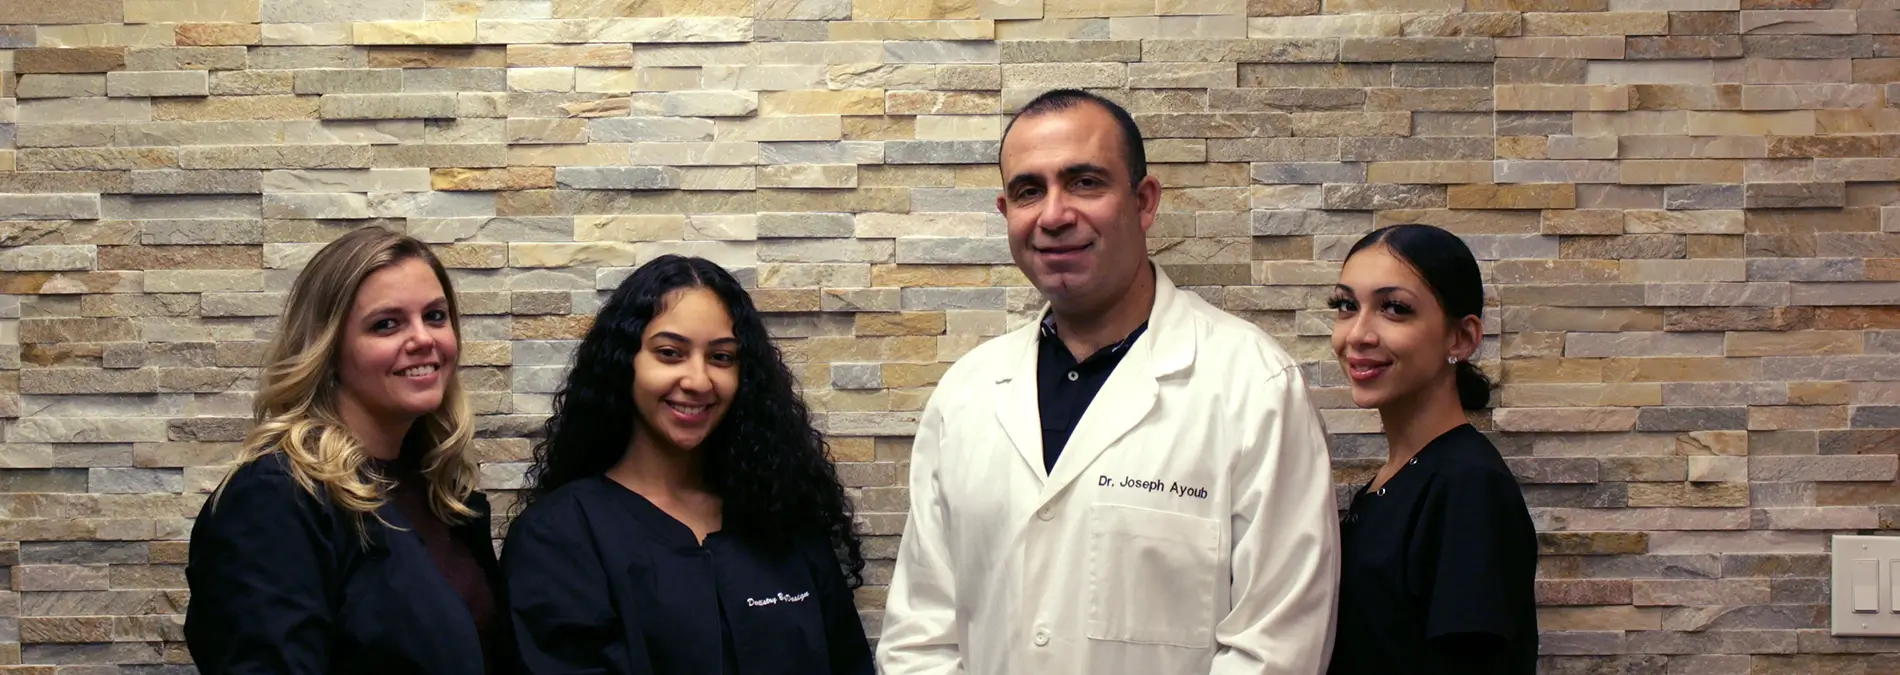 About Us at Dentistry By Design in Huntington NY | Cosmetic & Implant Dentist Huntington NY